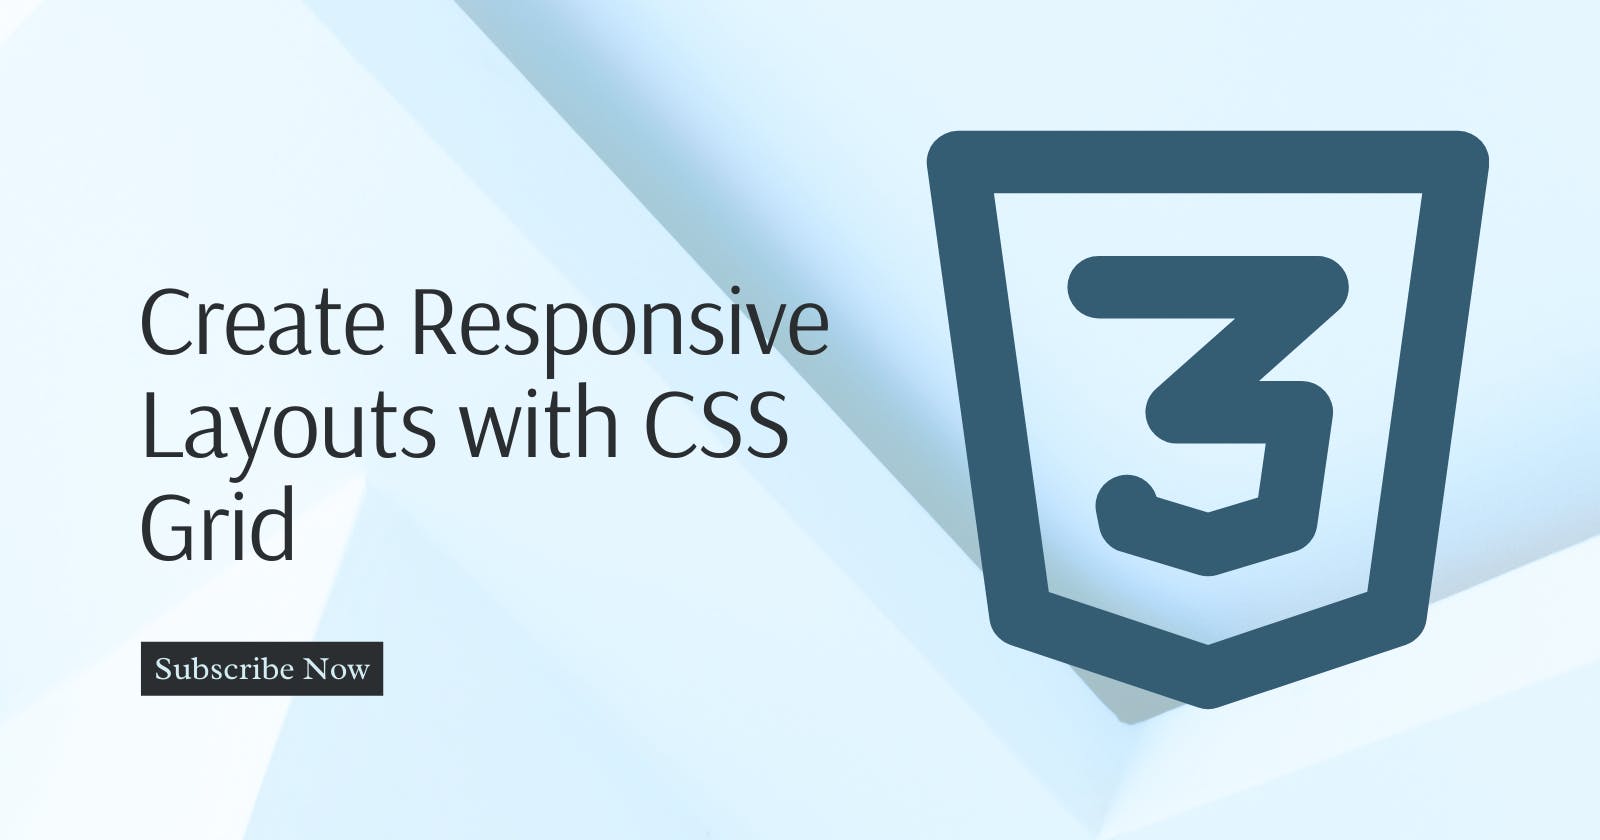 How to Create Responsive Layouts with CSS Grid